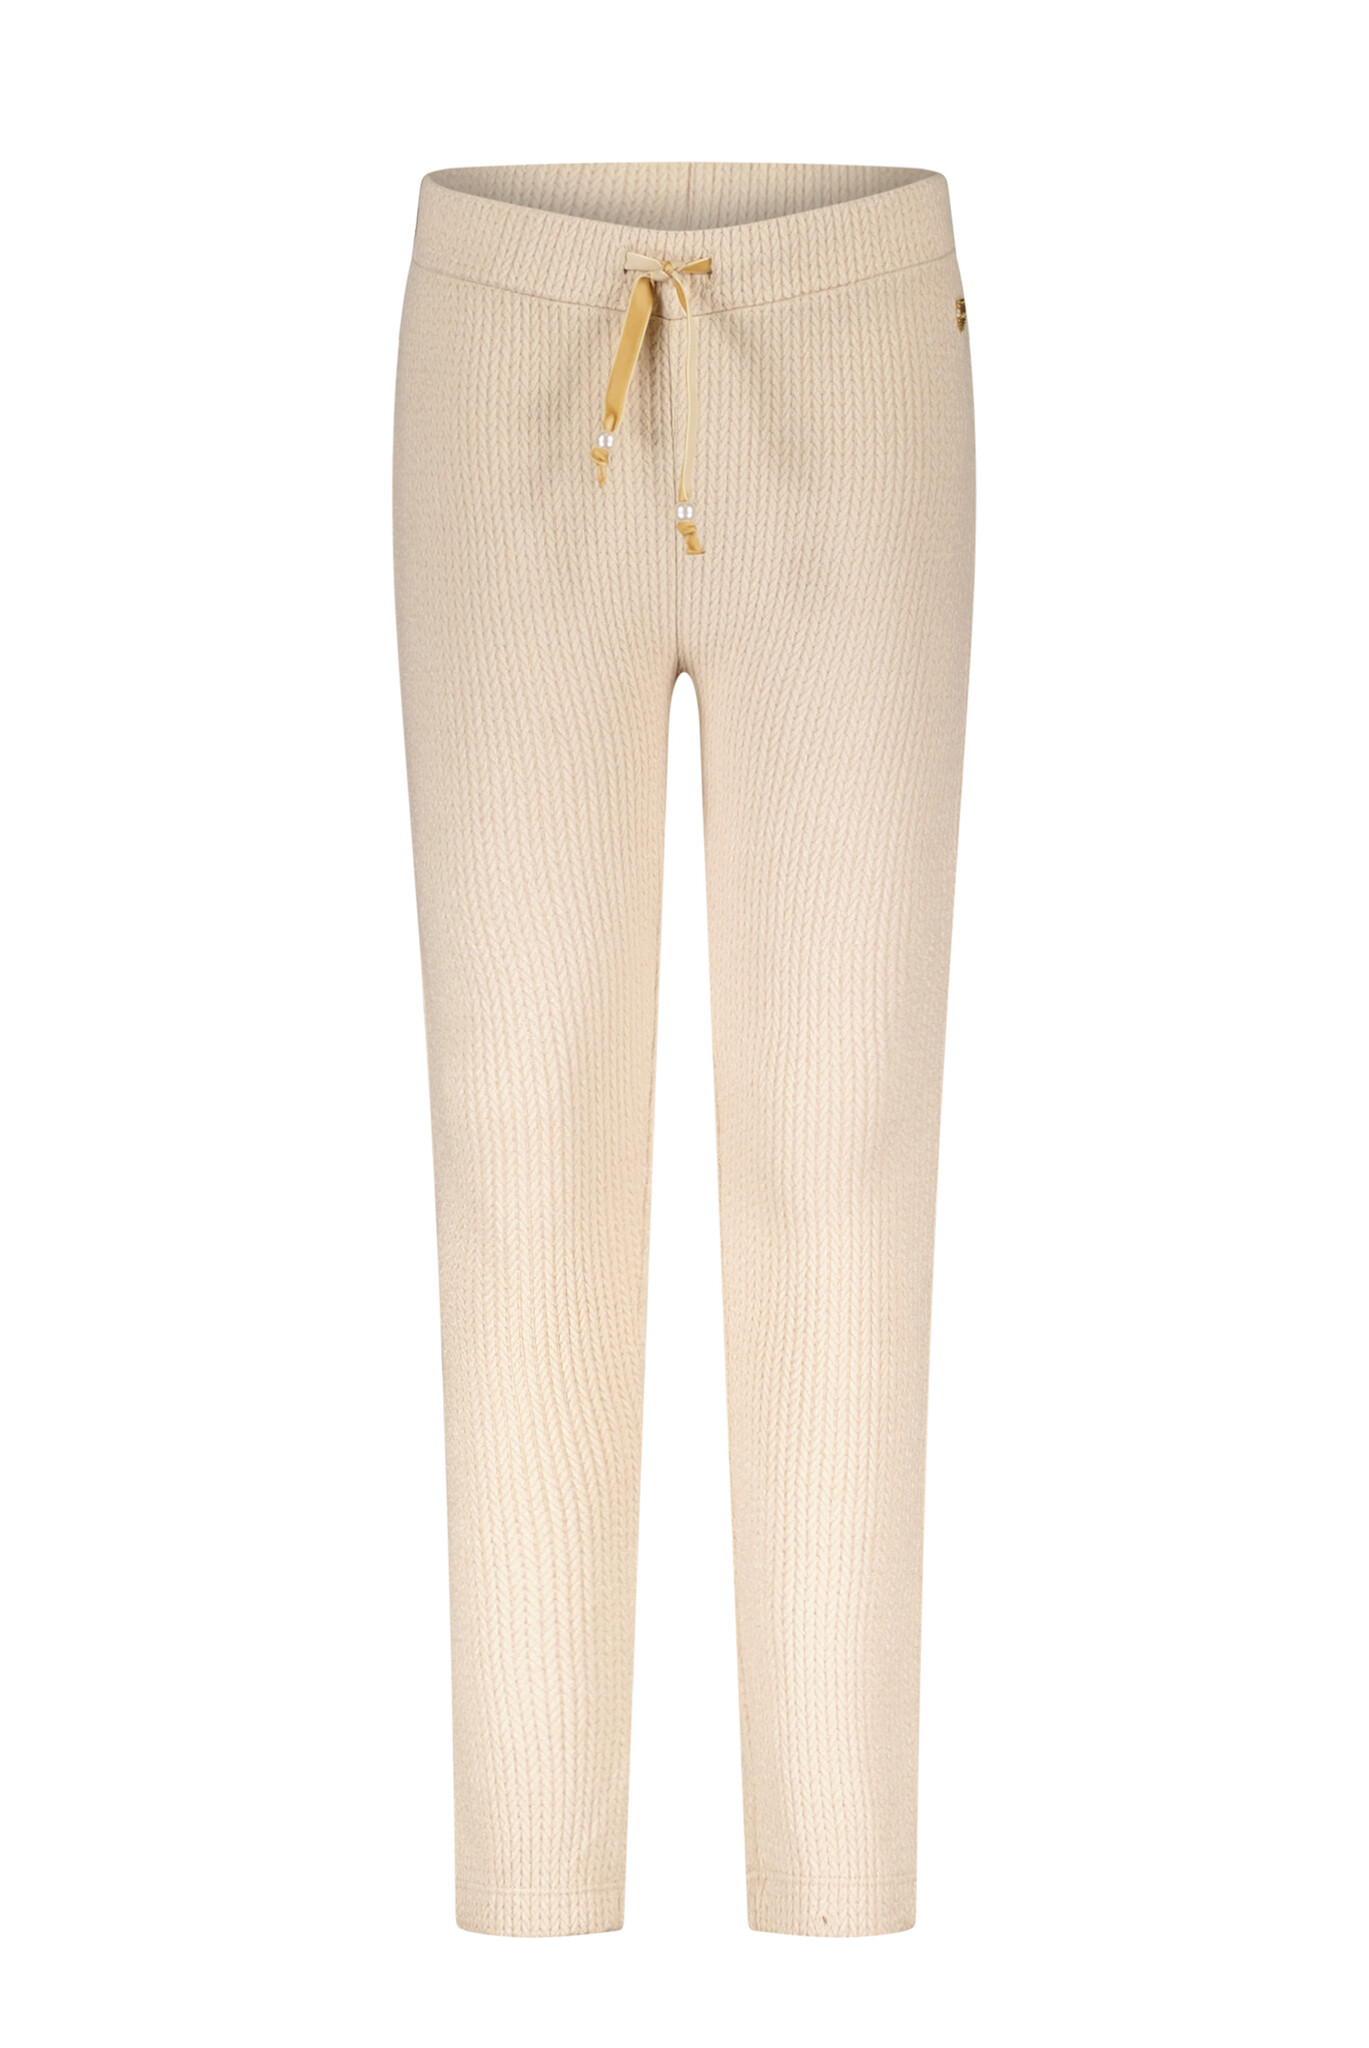 Le Chic Meisjes broek - Dualy - Light cappuccino